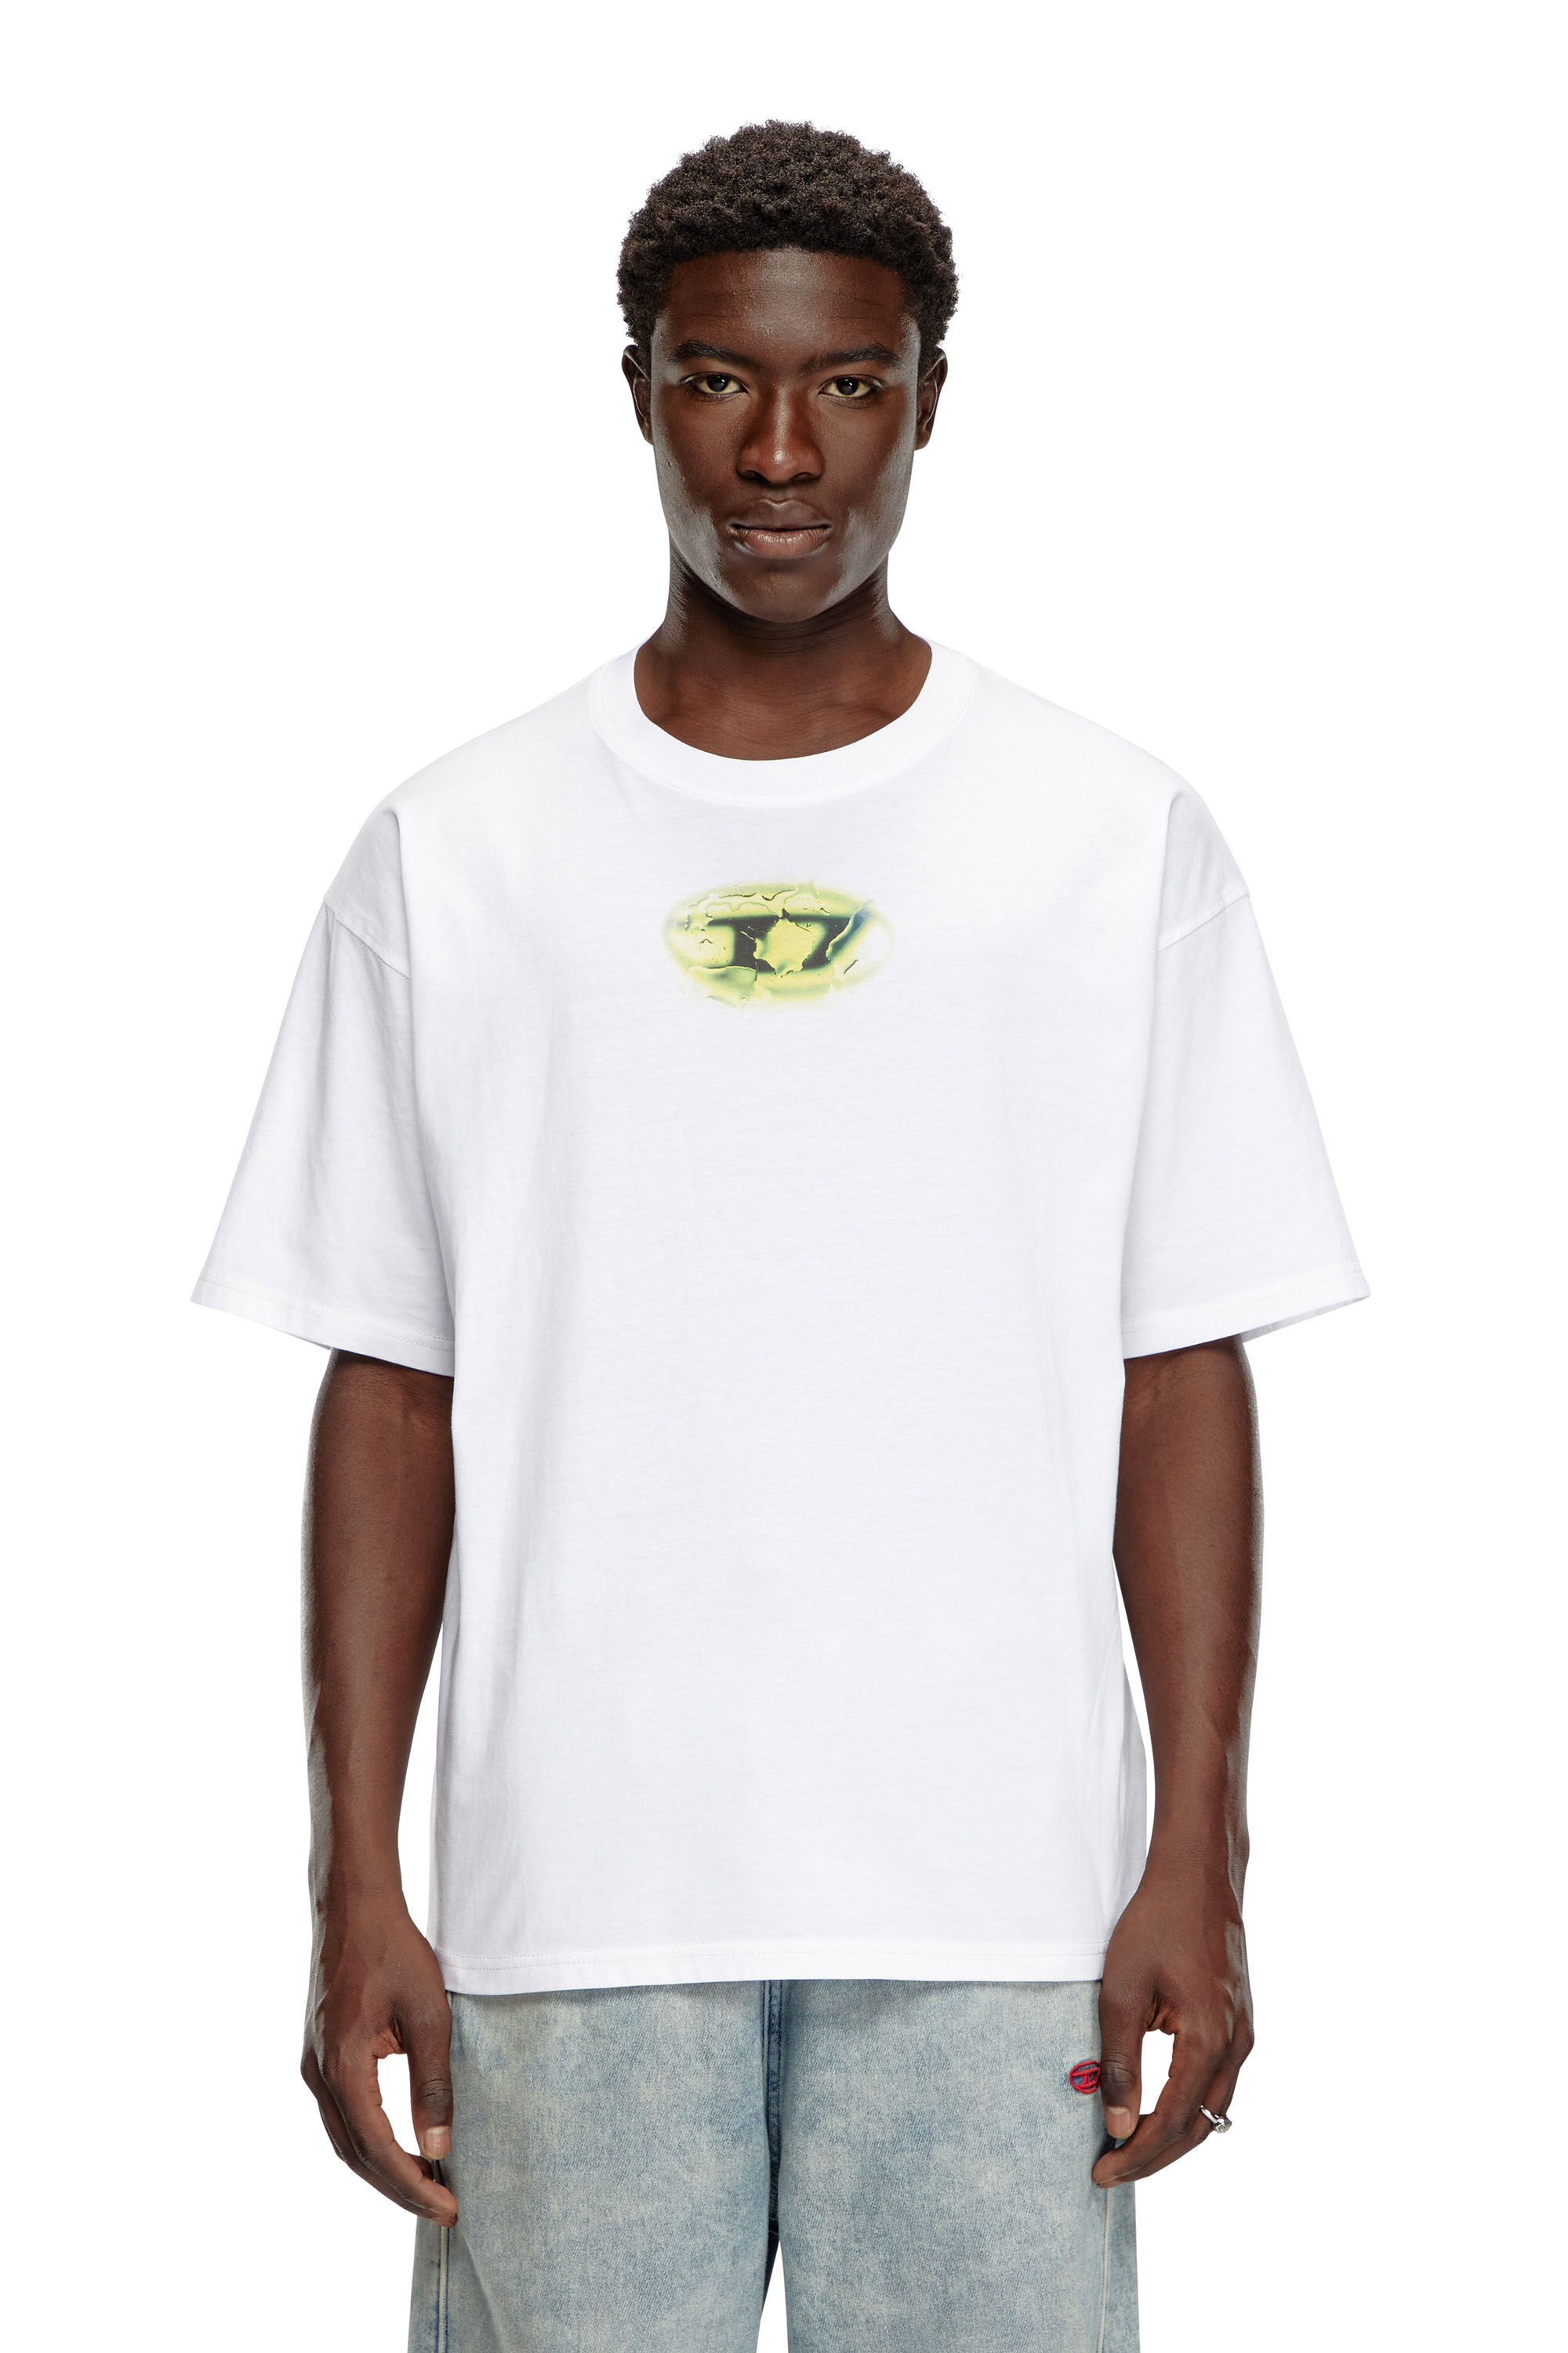 Diesel - T-BOXT-K3, Man T-shirt with glowing-effect logo in ToBeDefined - Image 3